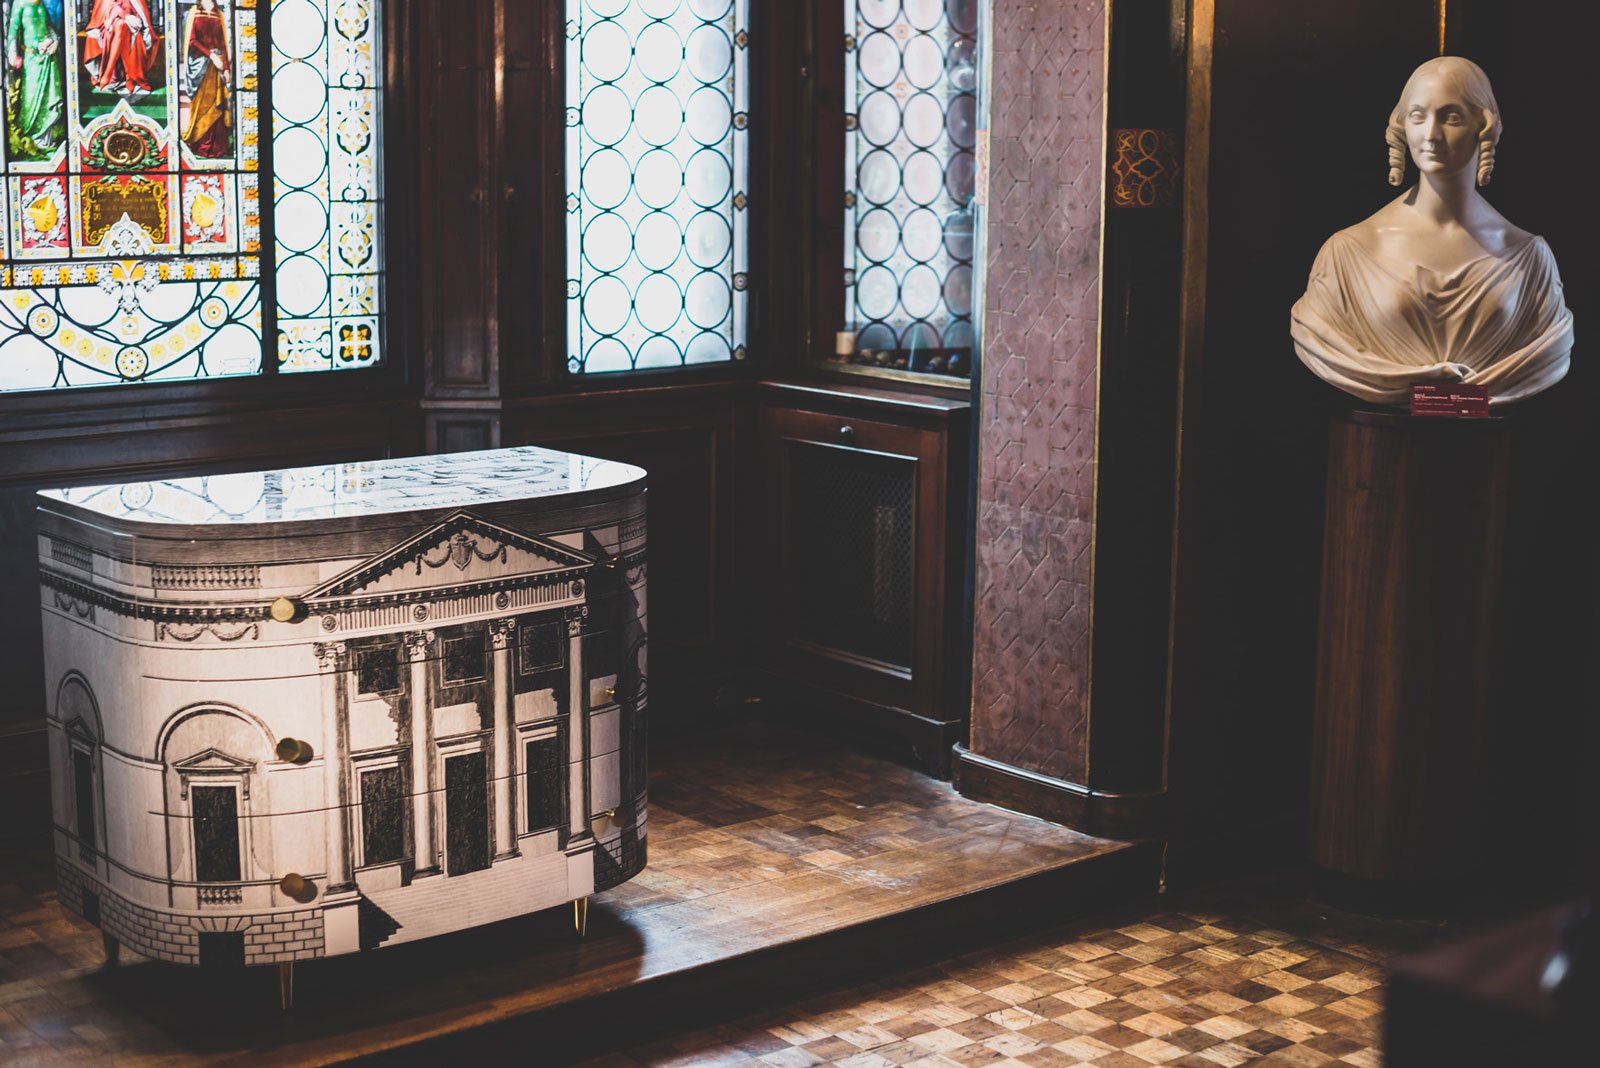  the com & # XF2; Palladian Fornasetti the 1951 part of the permanent collection Poldi Pezzoli. the exhibition ALMOST SECRETS runs along the & # x2019; entire exhibition, where the works fit harmoniously alongside the already cabinets and chests & # xE0; present in the house museum. 